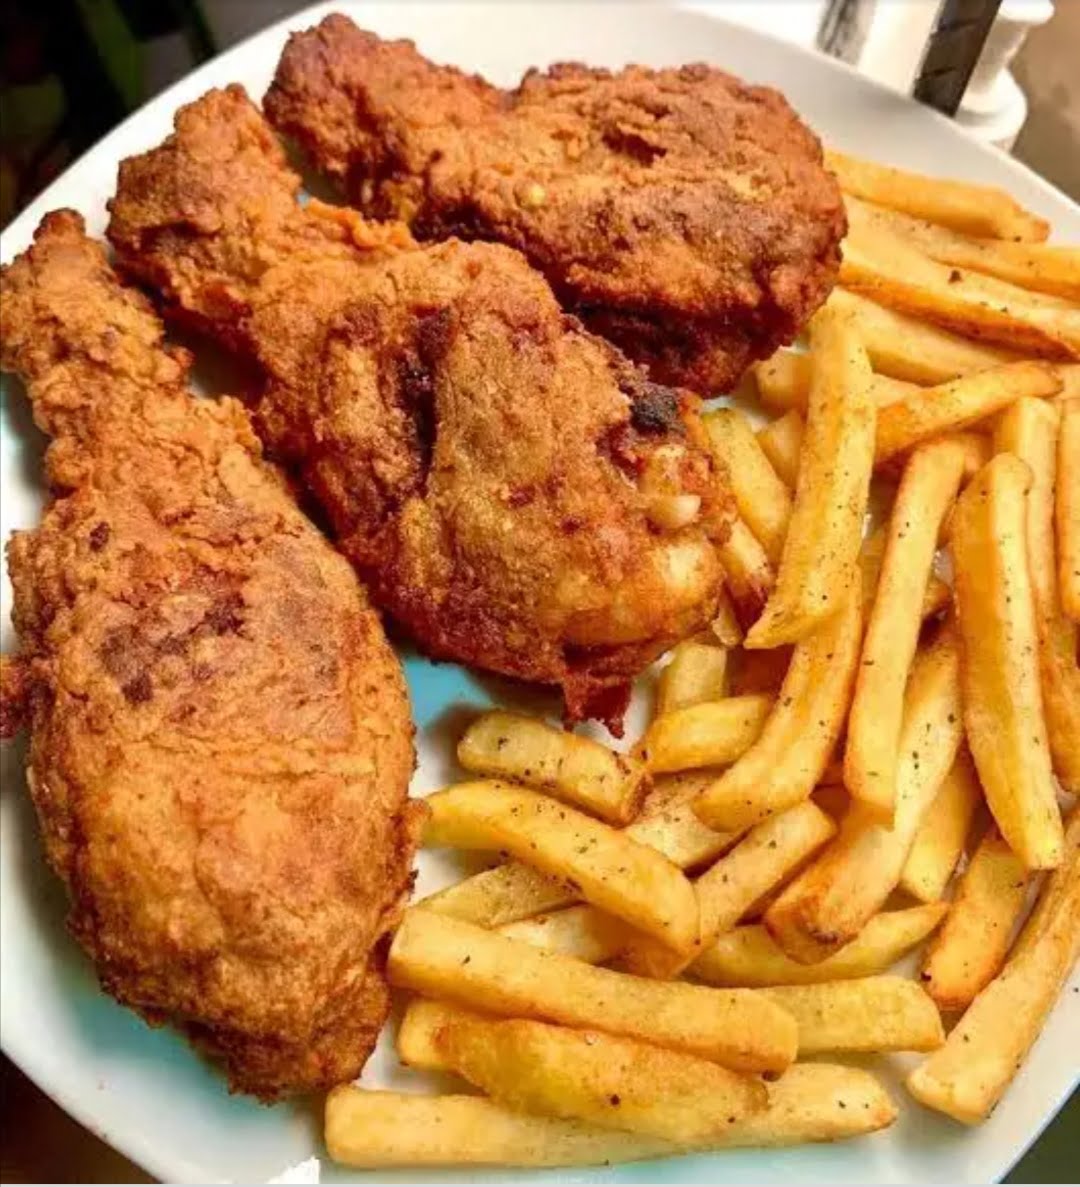 Home style fried chicken and chips